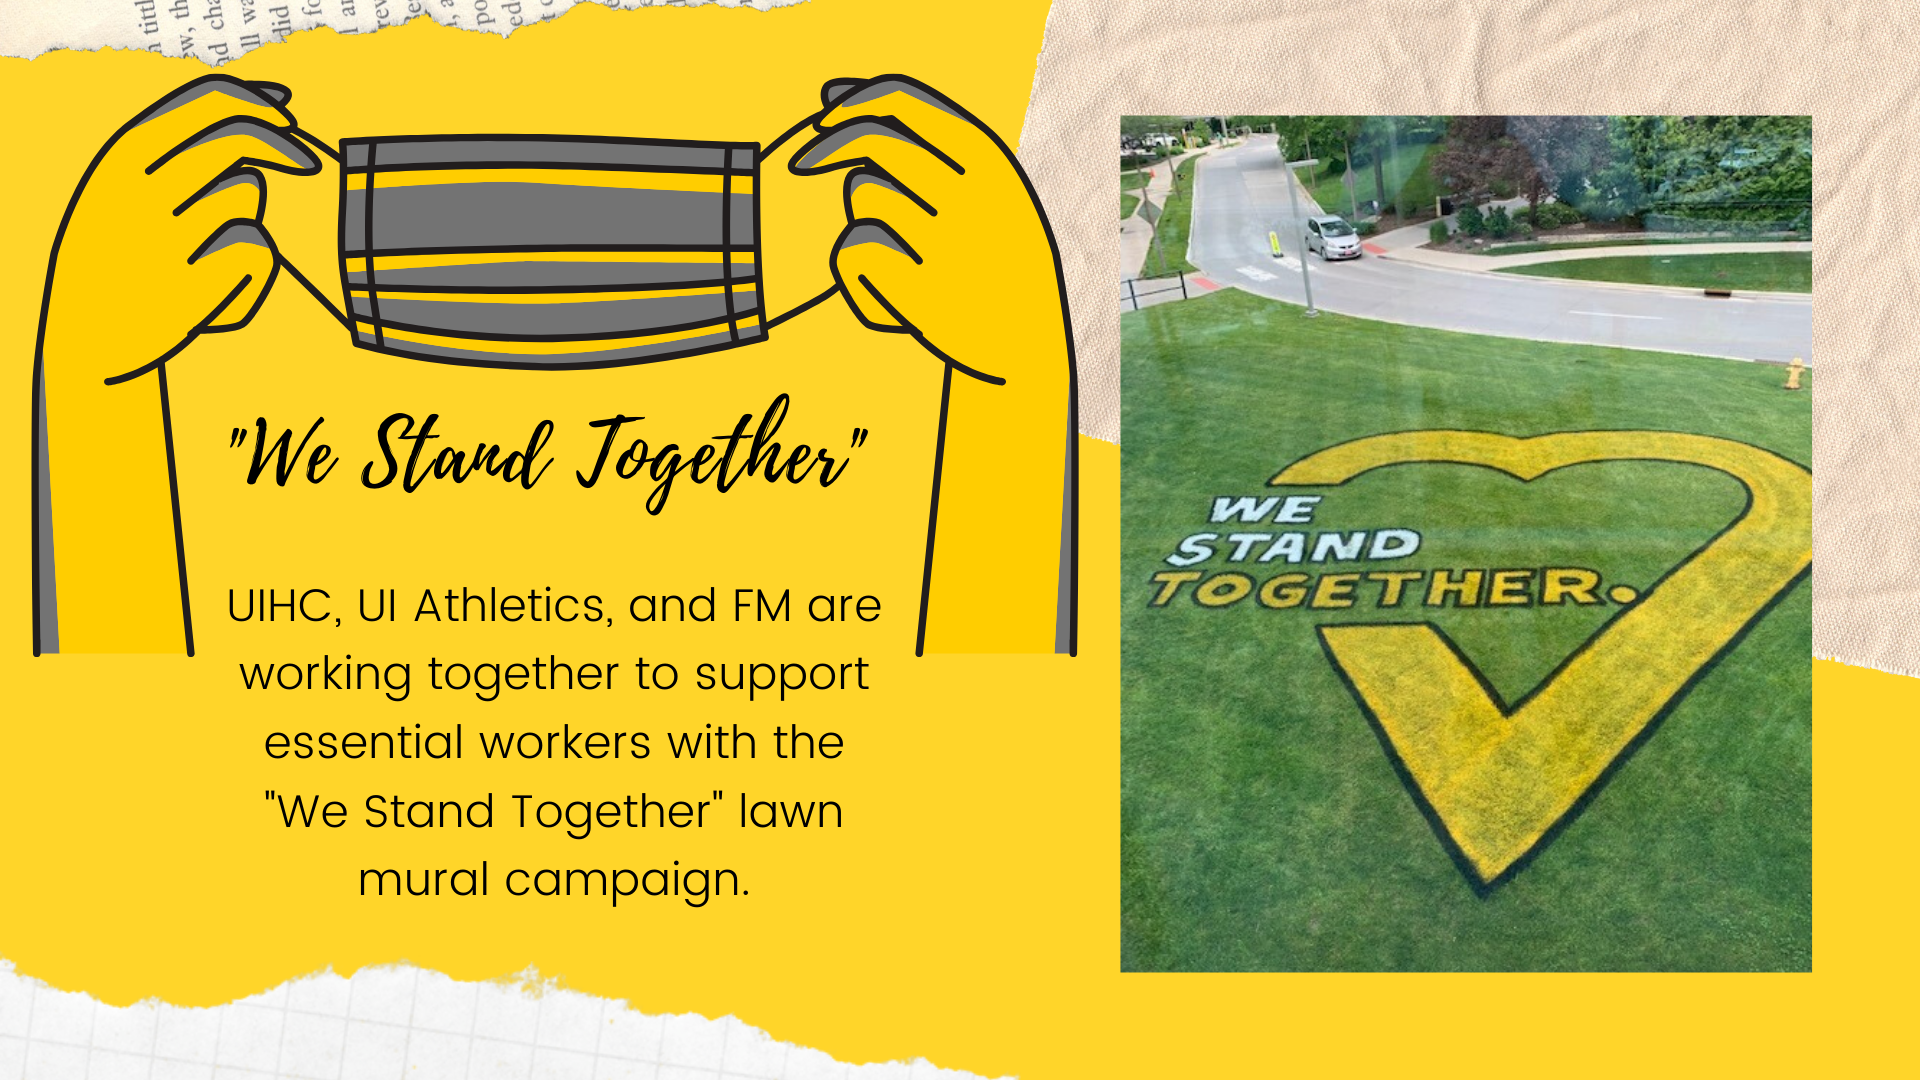 "We Stand Together" lawn mural campaign